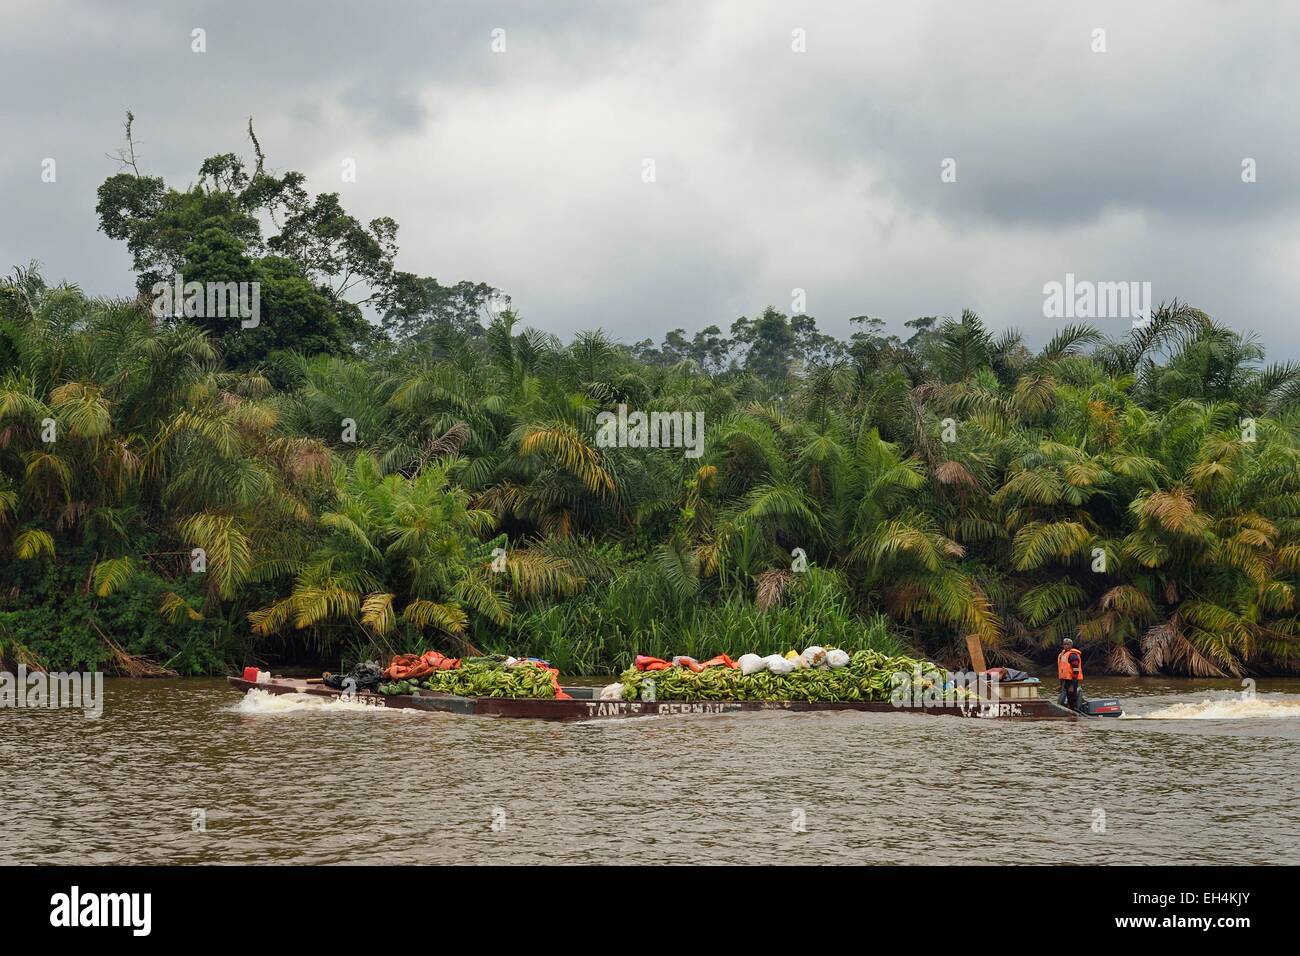 Gabon, Ogooue-Maritime Province, motor boat with its load of bananas going up a river of the Fernan Vaz (Nkomi) lagoon Stock Photo